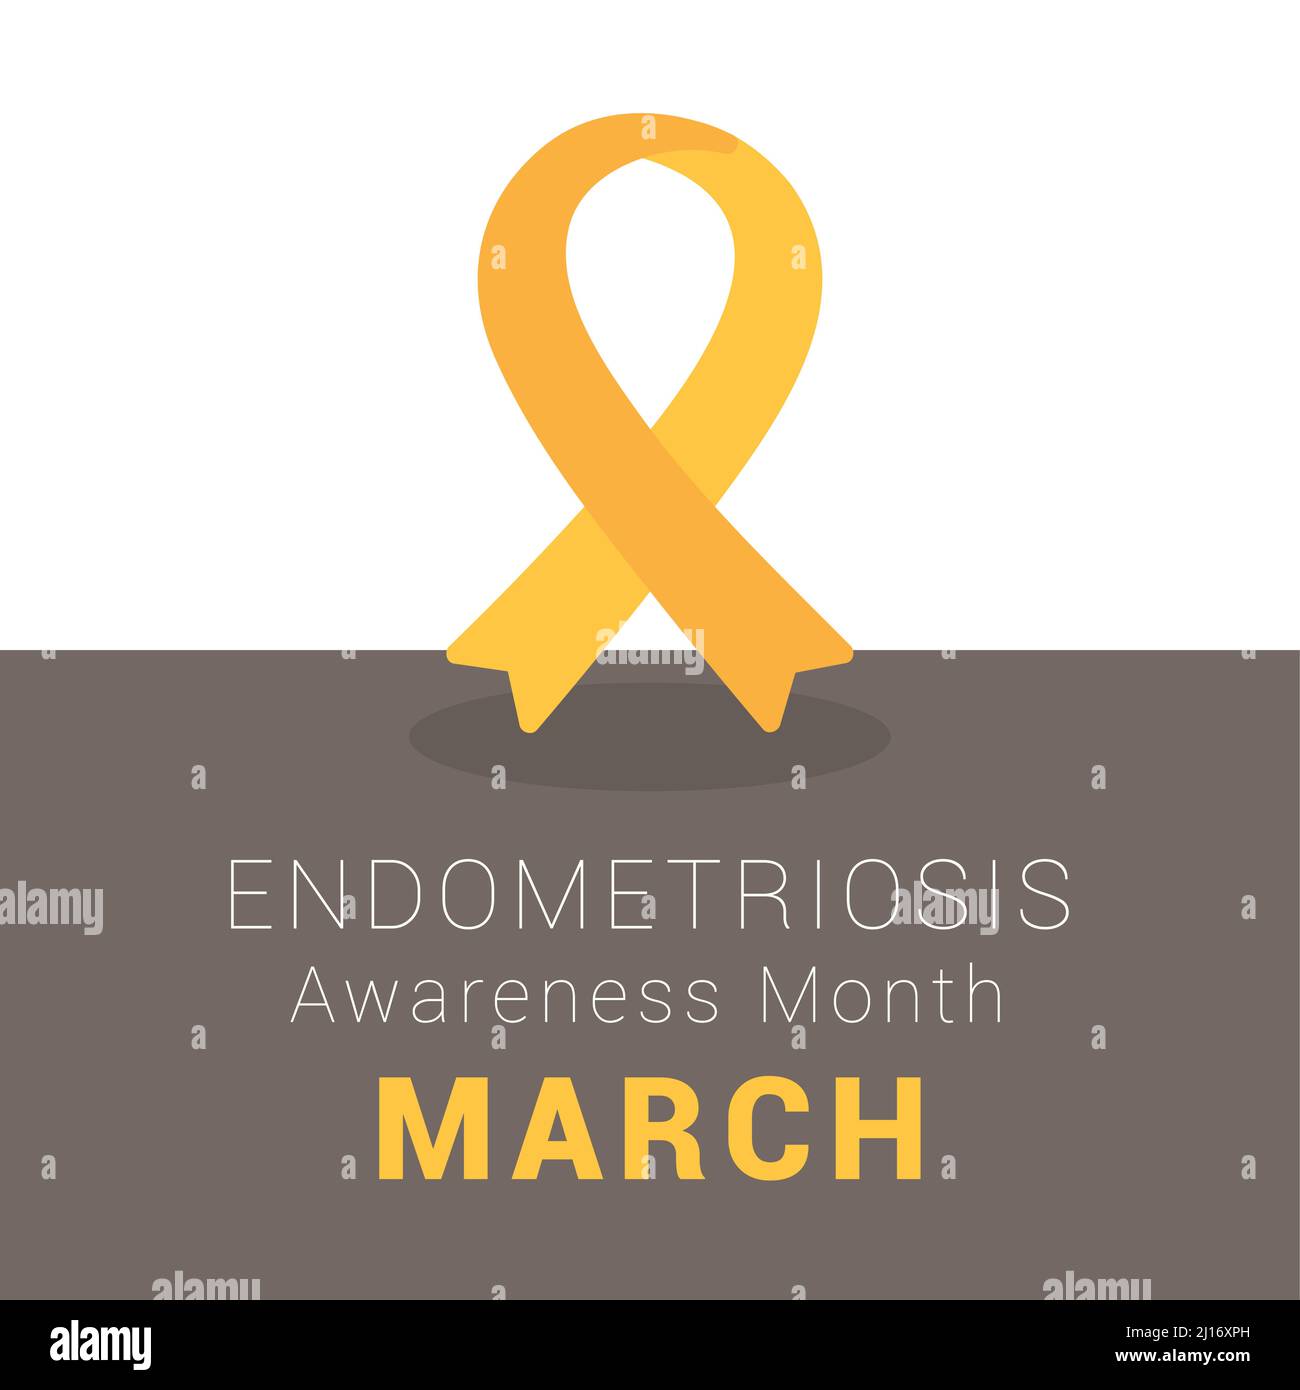 National Endometriosis Awareness Month march info graphic Stock Vector